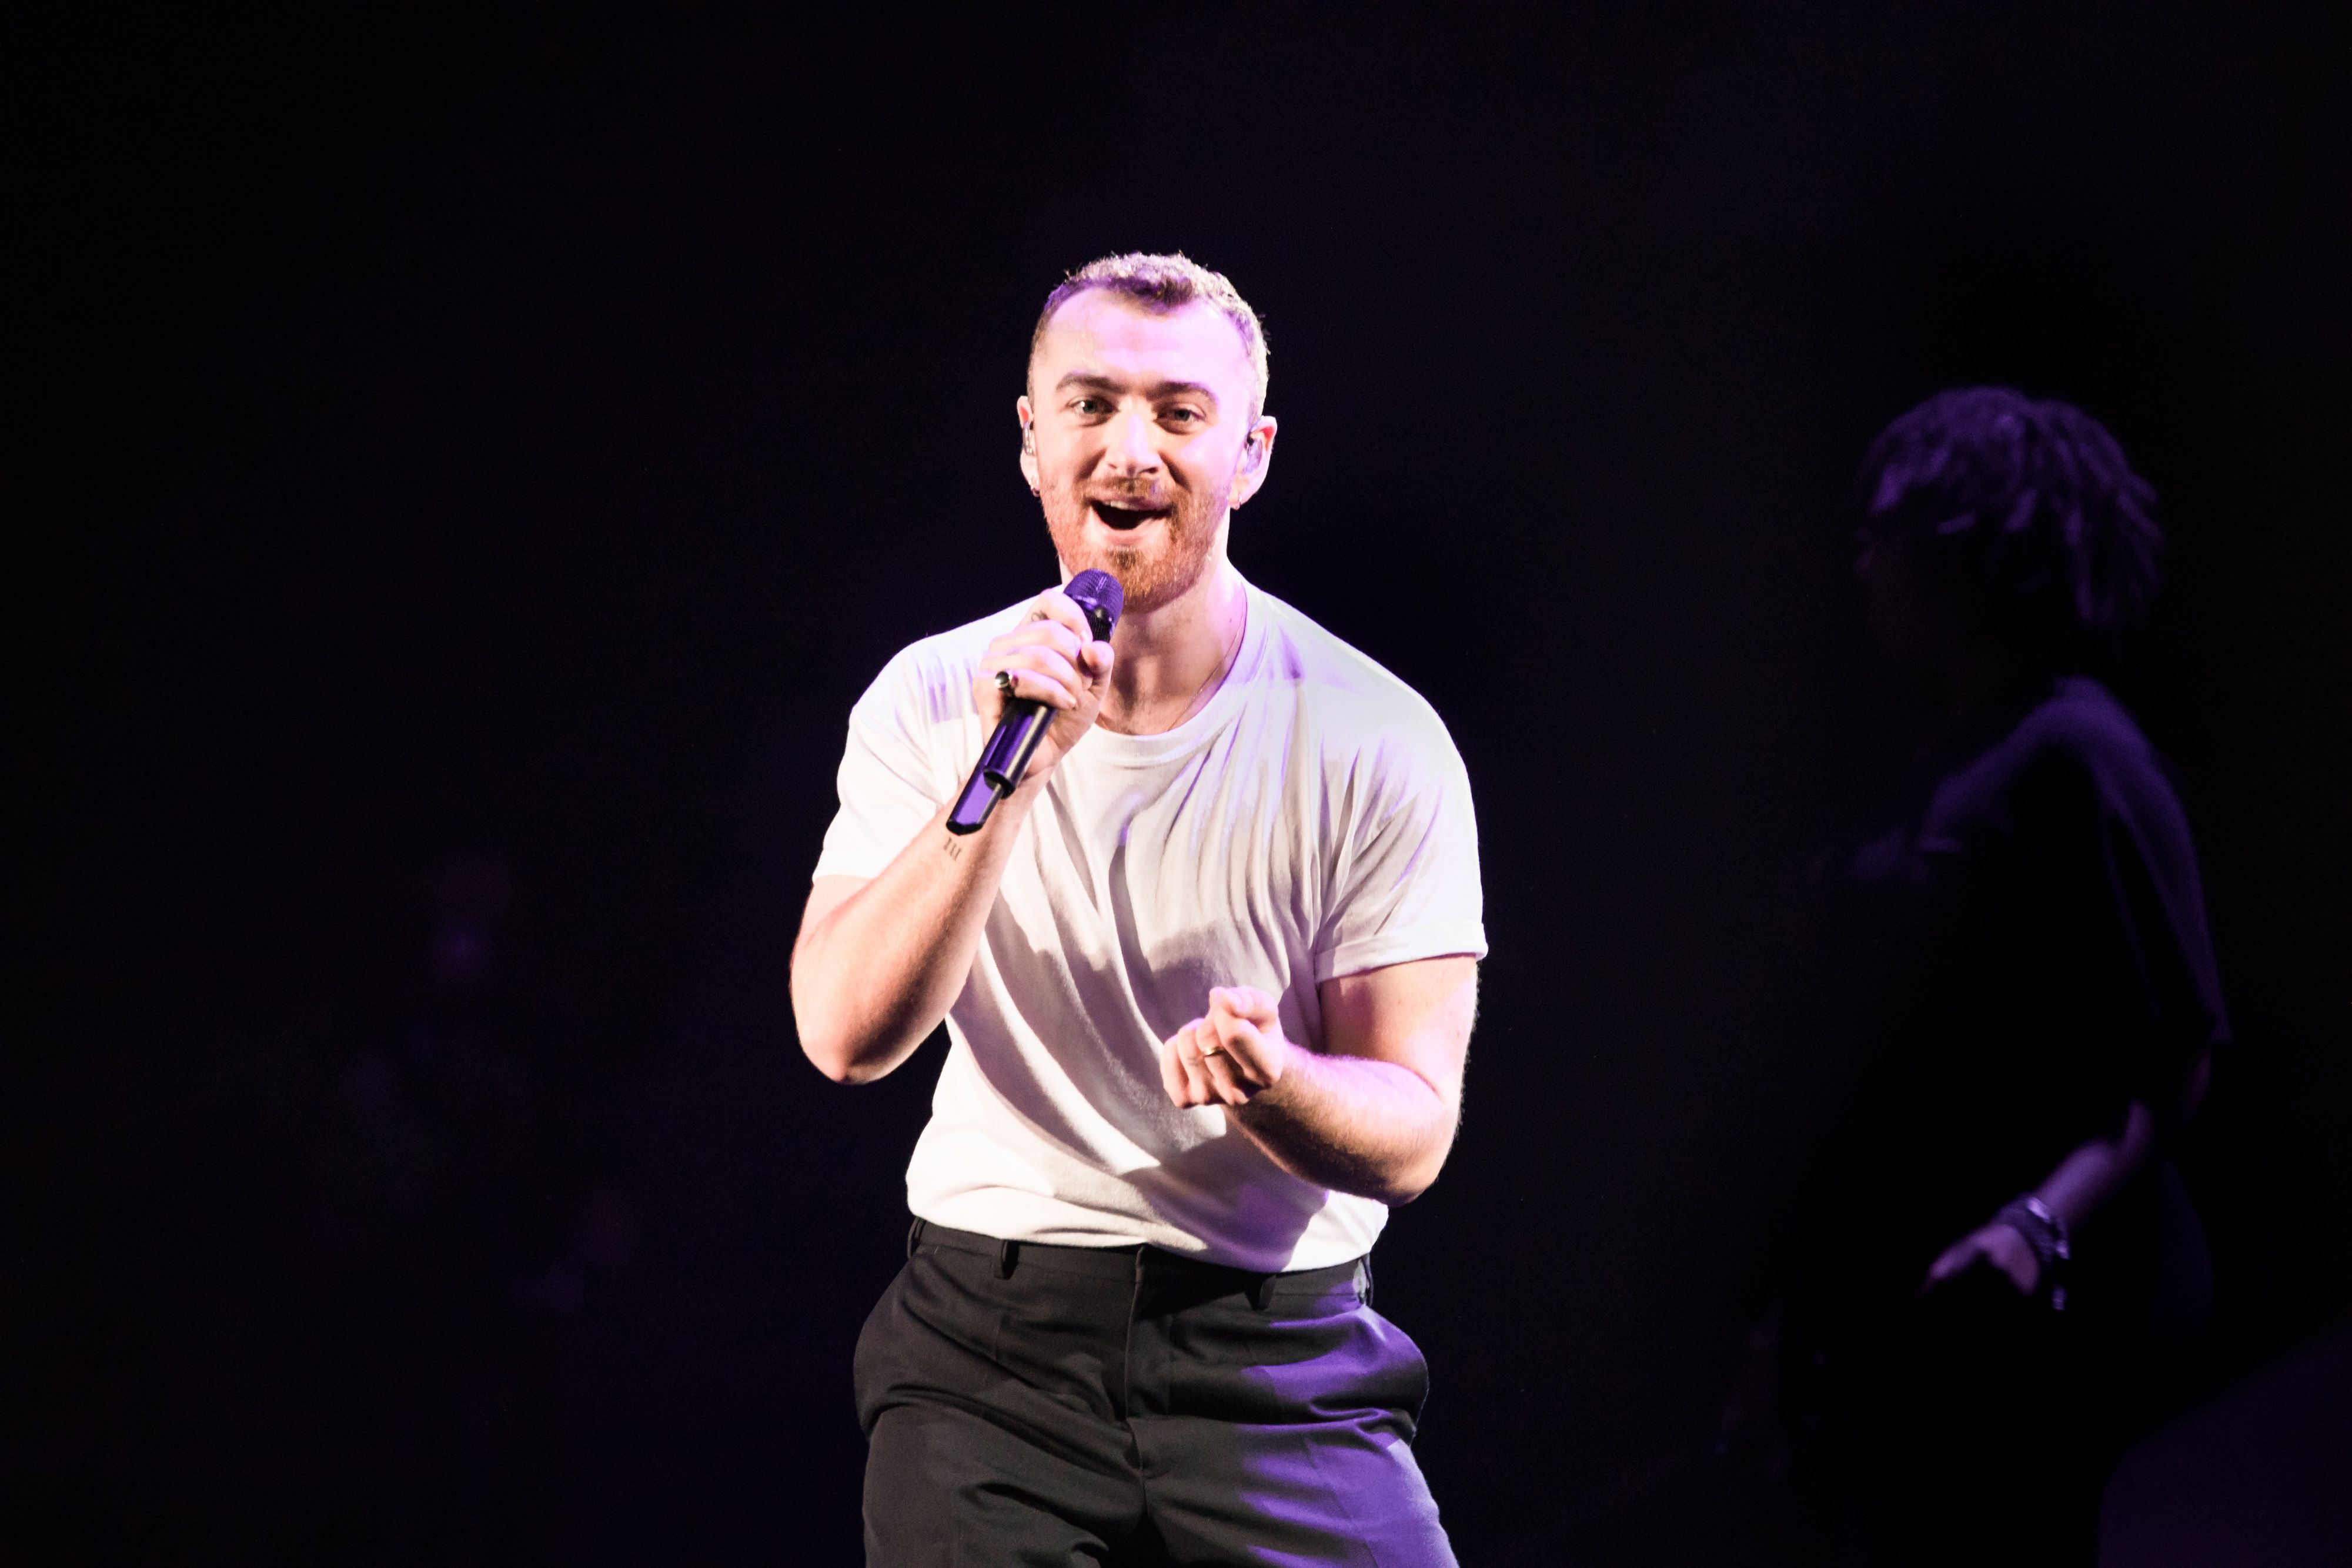 sam smith performs during the thrill of it all world tour 2018 in shanghai